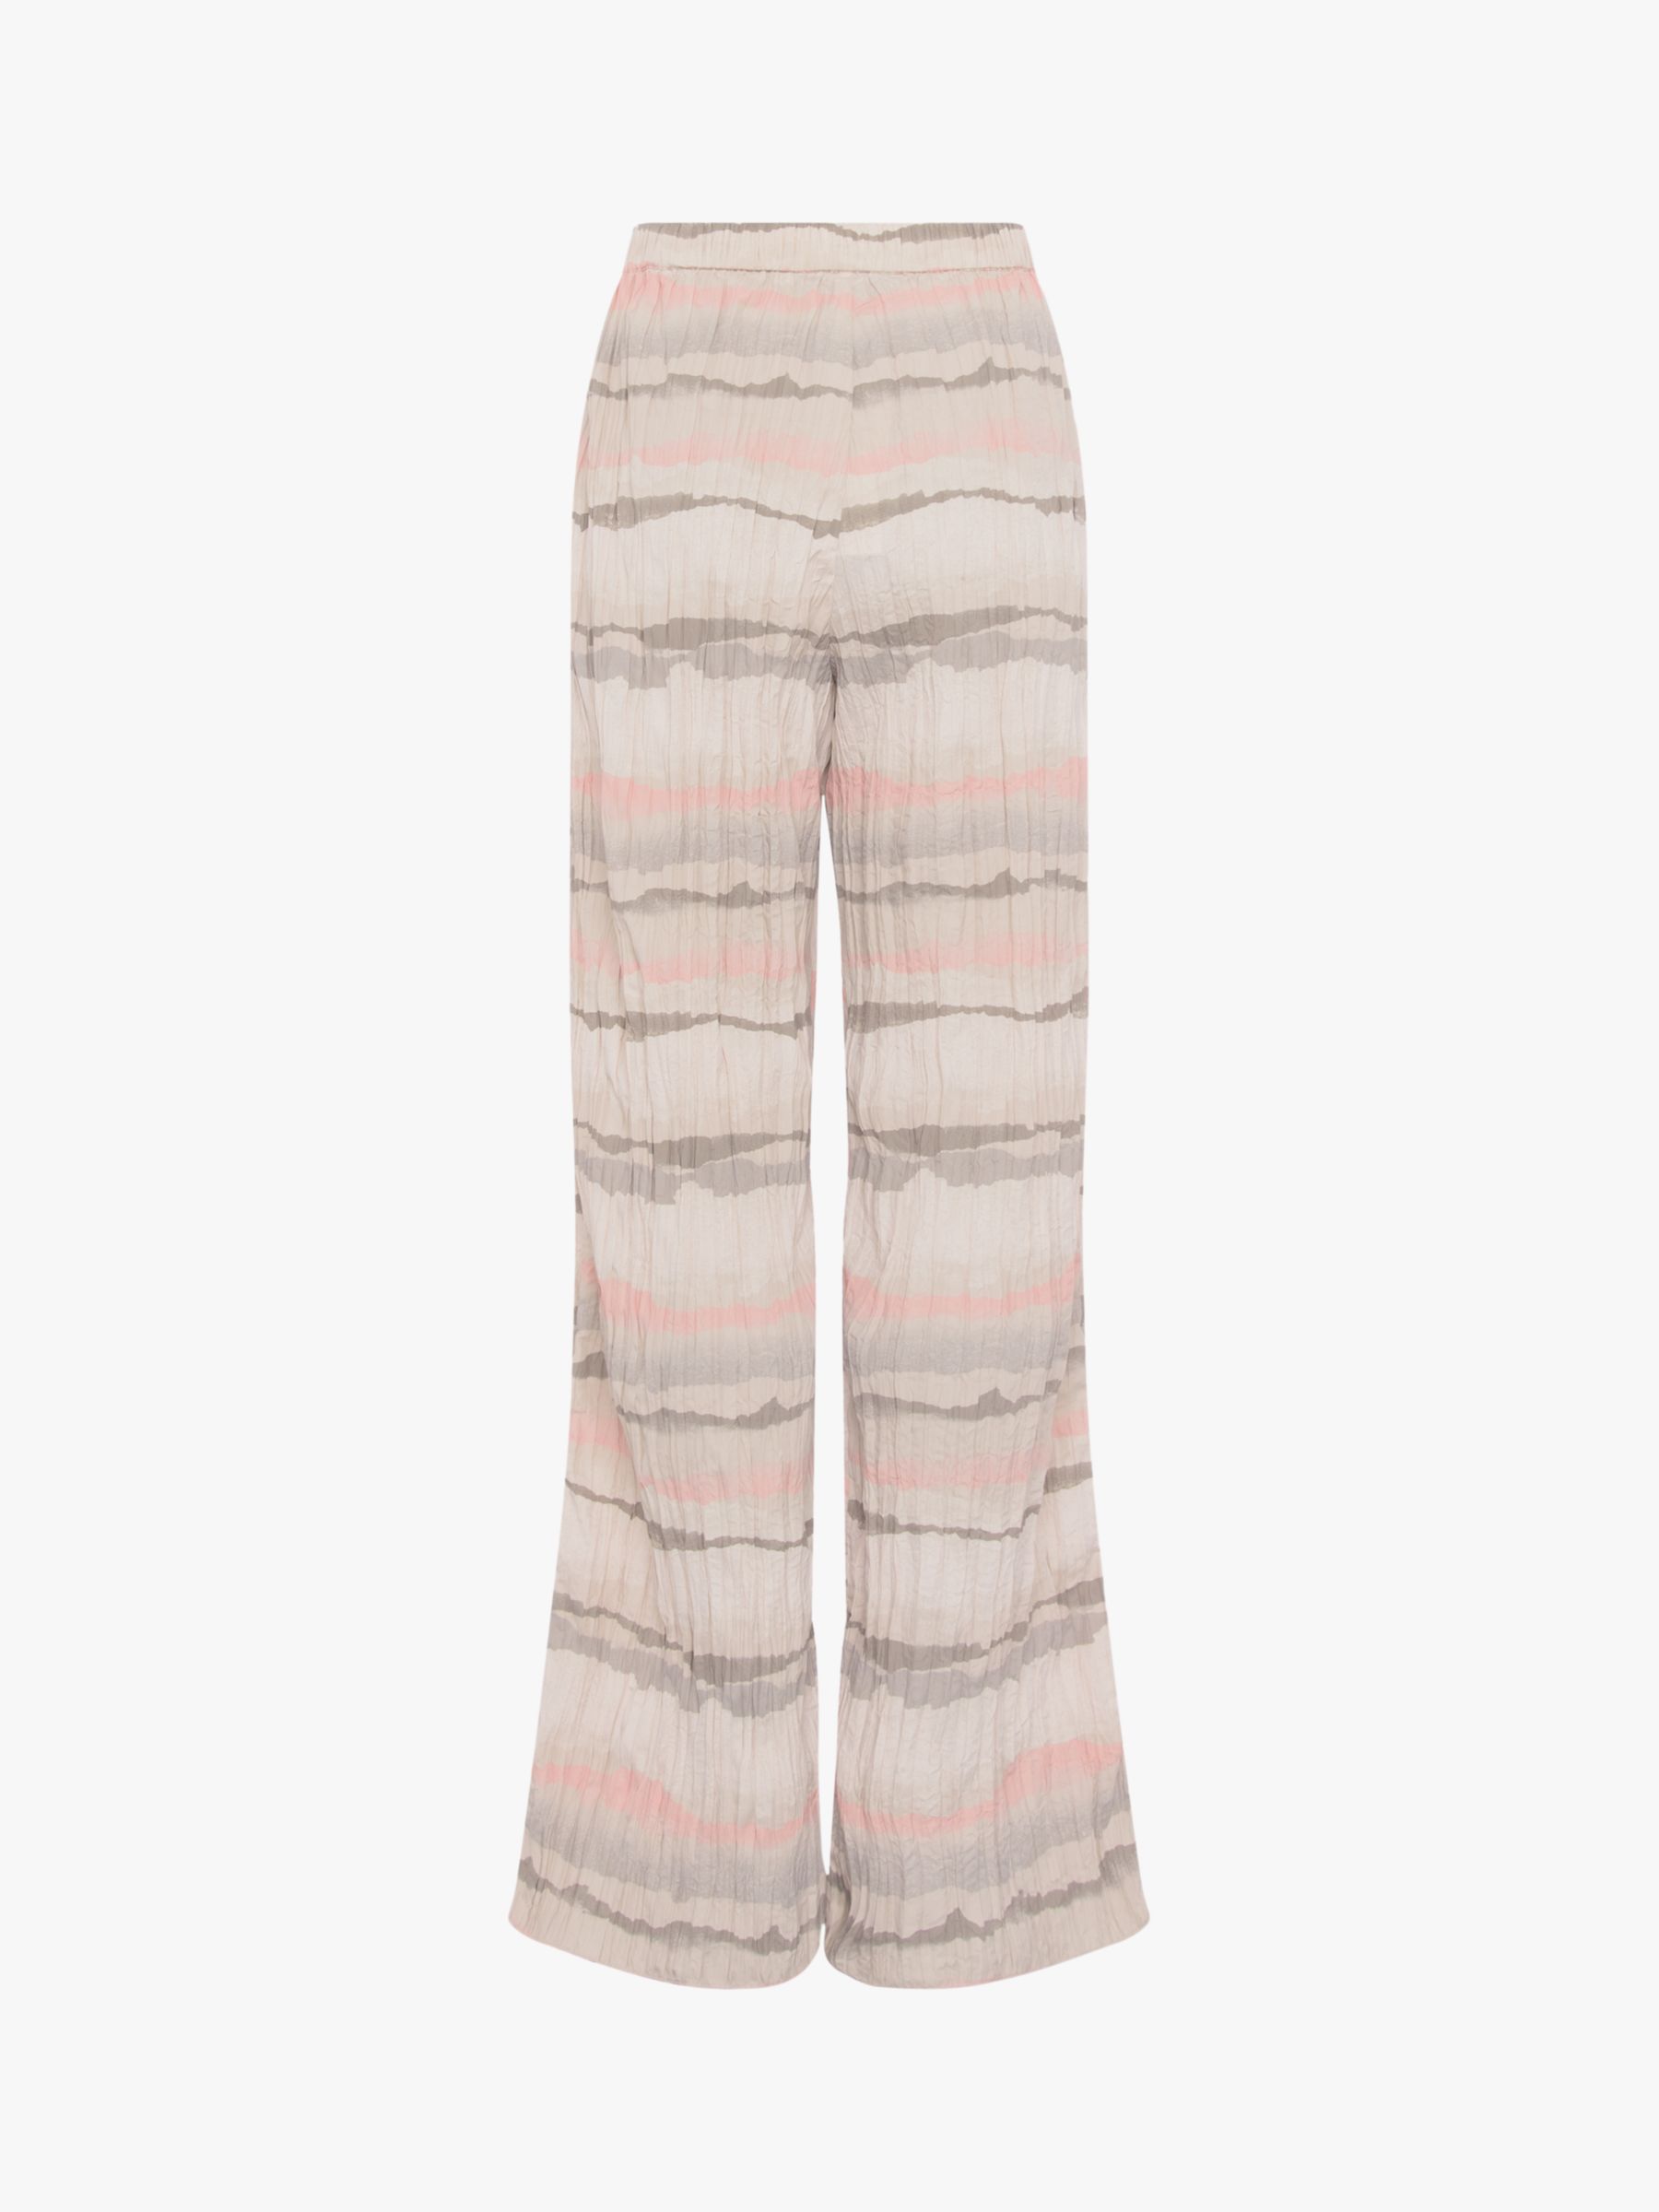 French Connection Hope Crinkle Trousers, Dusty Pink at John Lewis ...